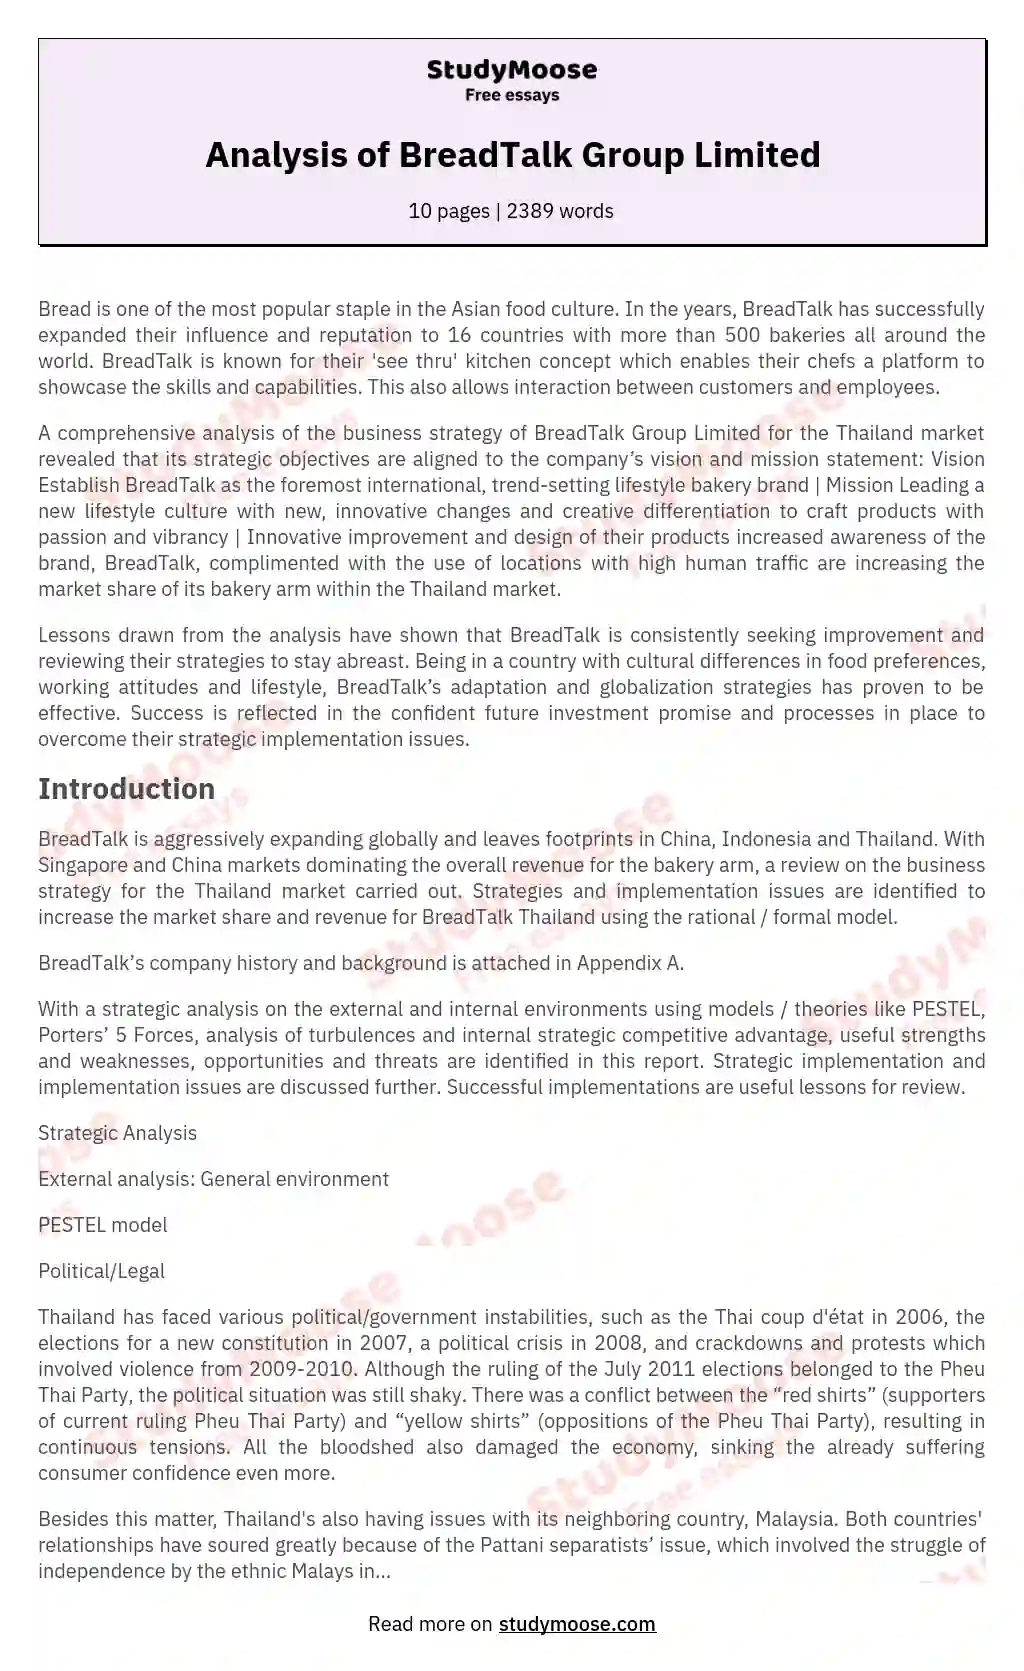 Analysis of BreadTalk Group Limited essay